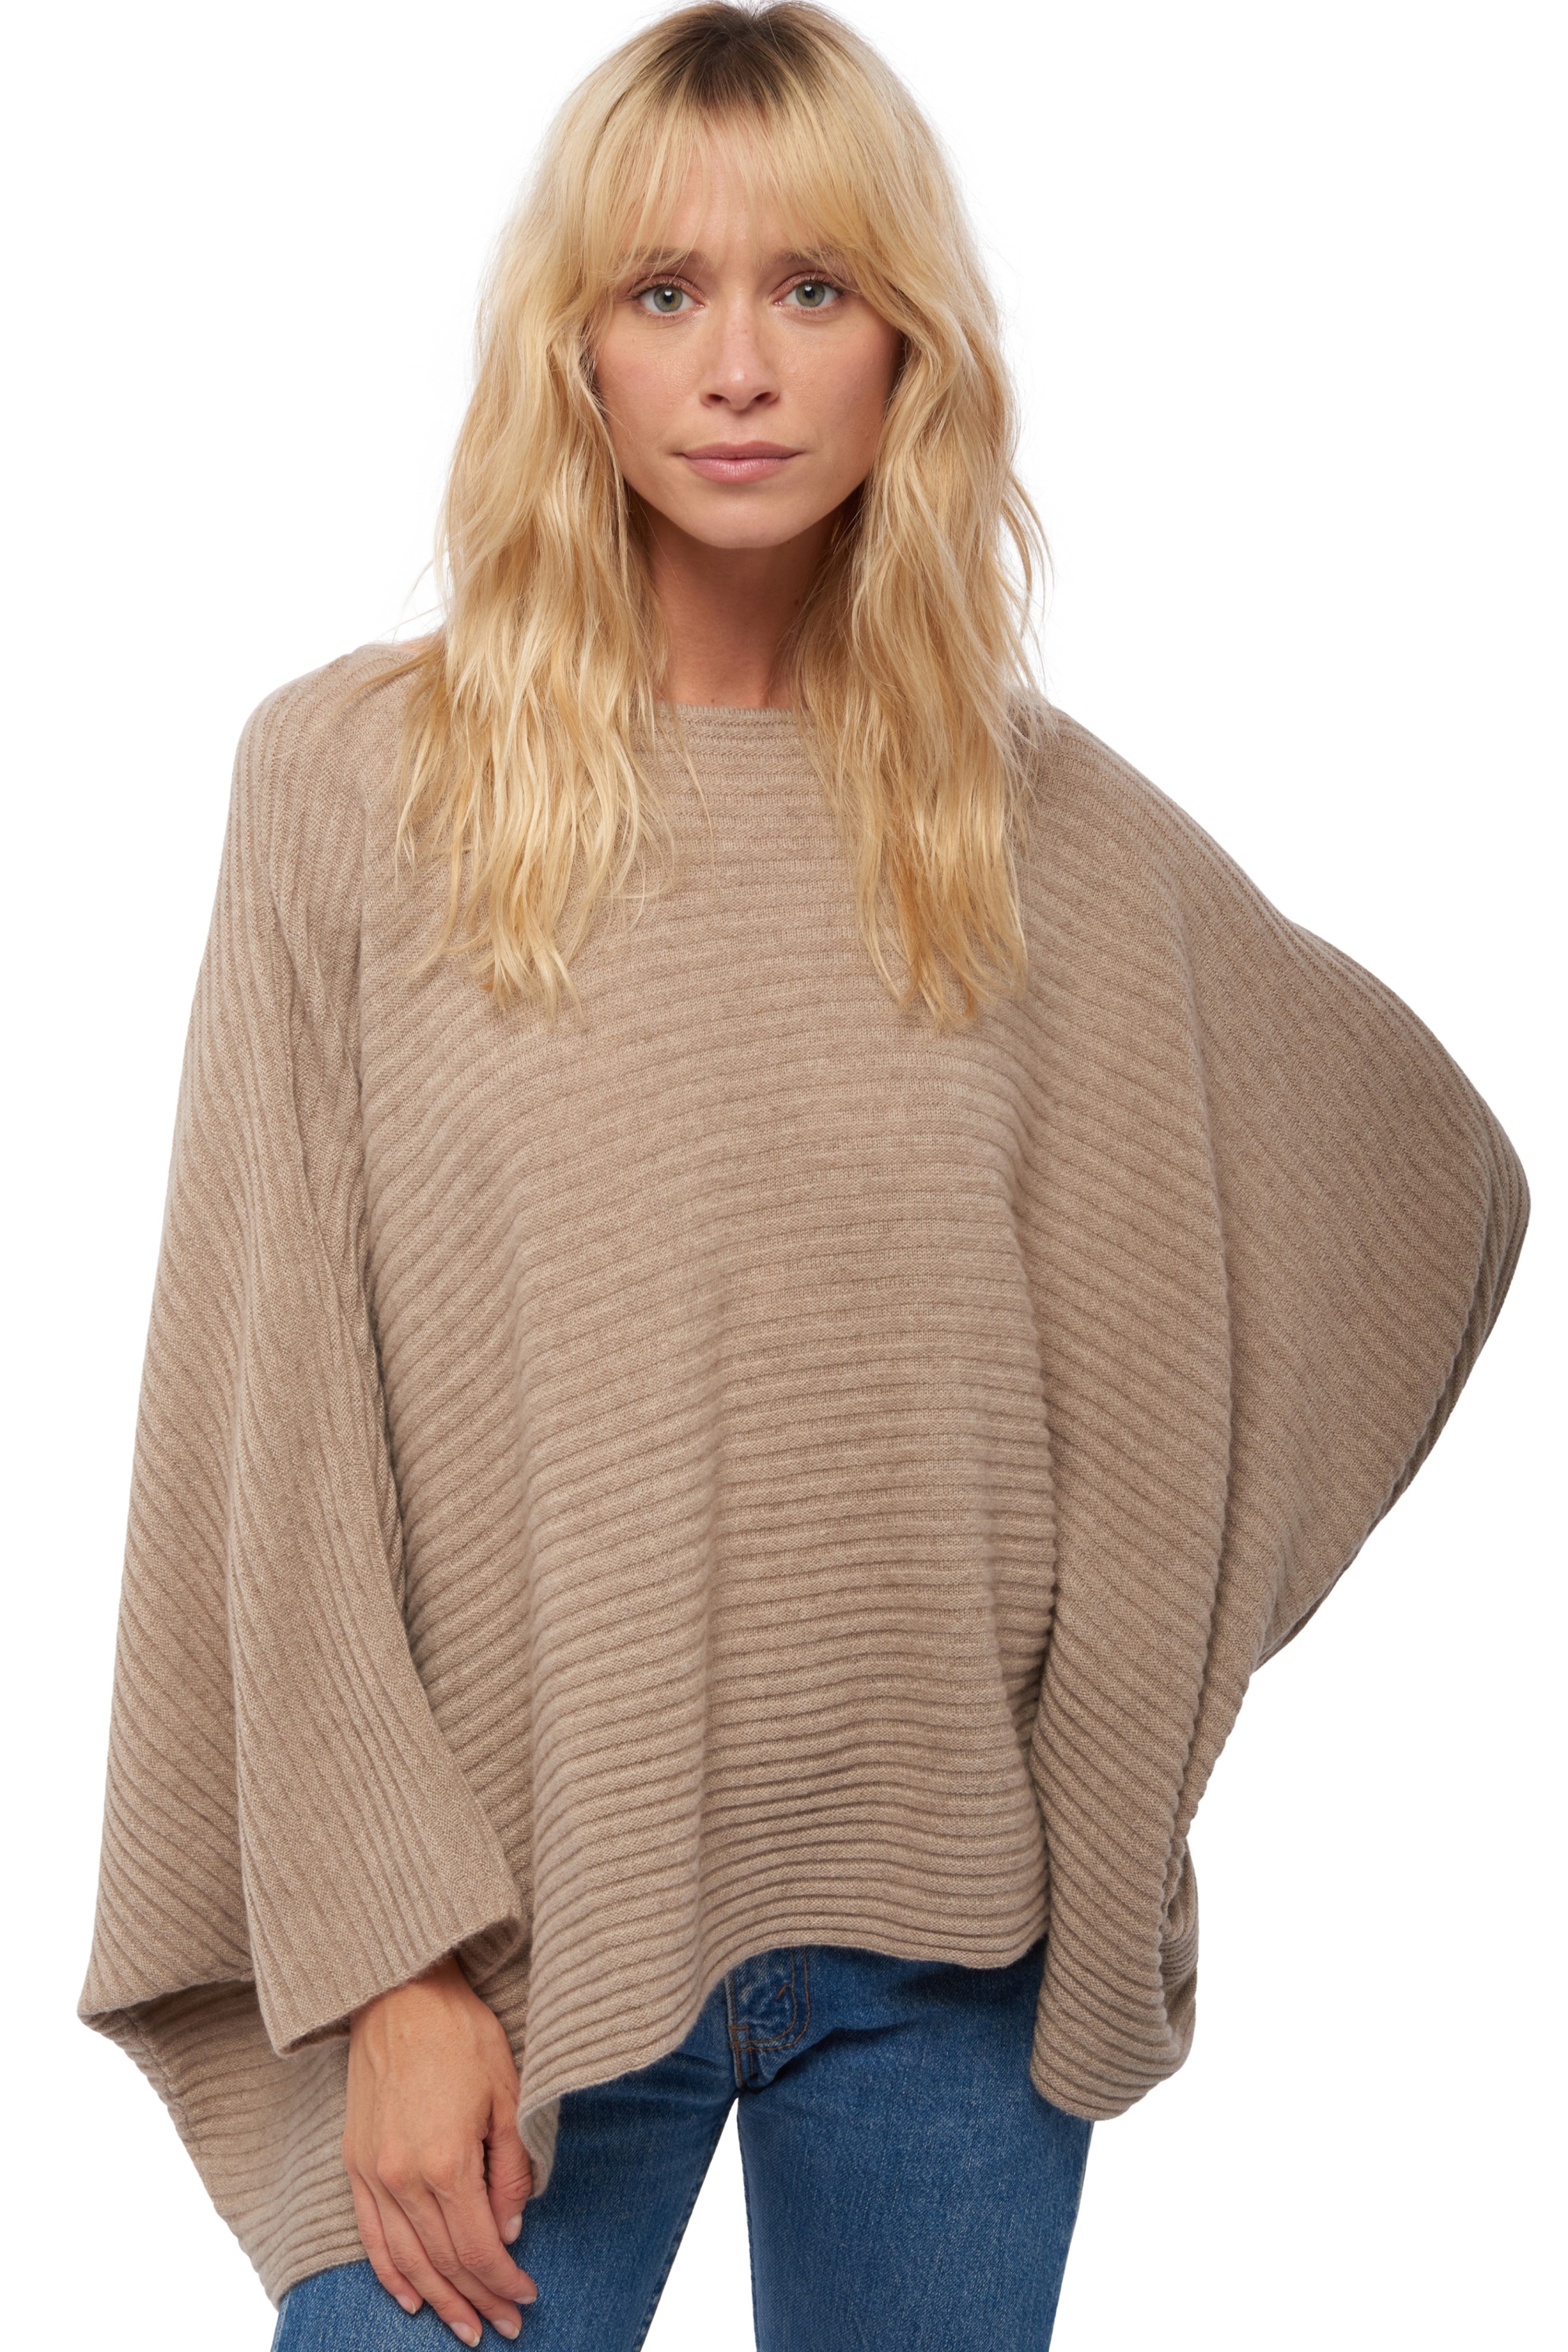 Cachemire pull femme col rond veel natural brown 3xl